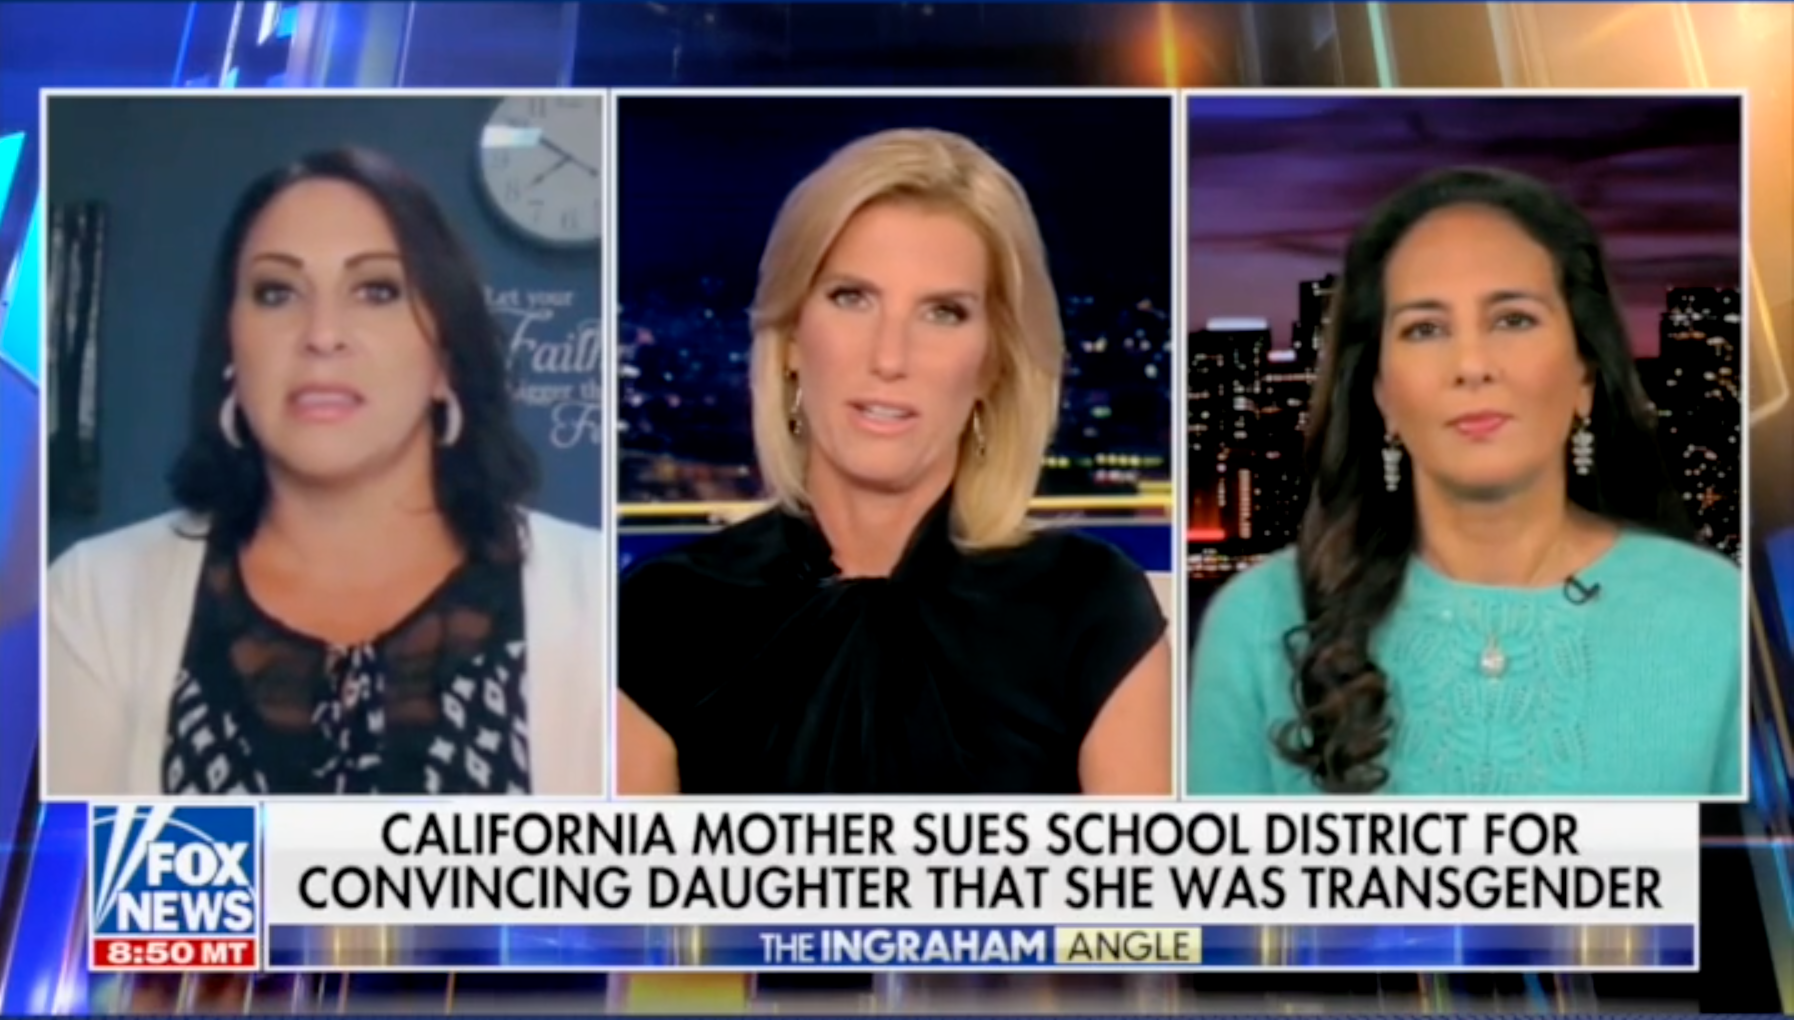 Victory! School district held accountable for socially transitioning child behind parent’s back